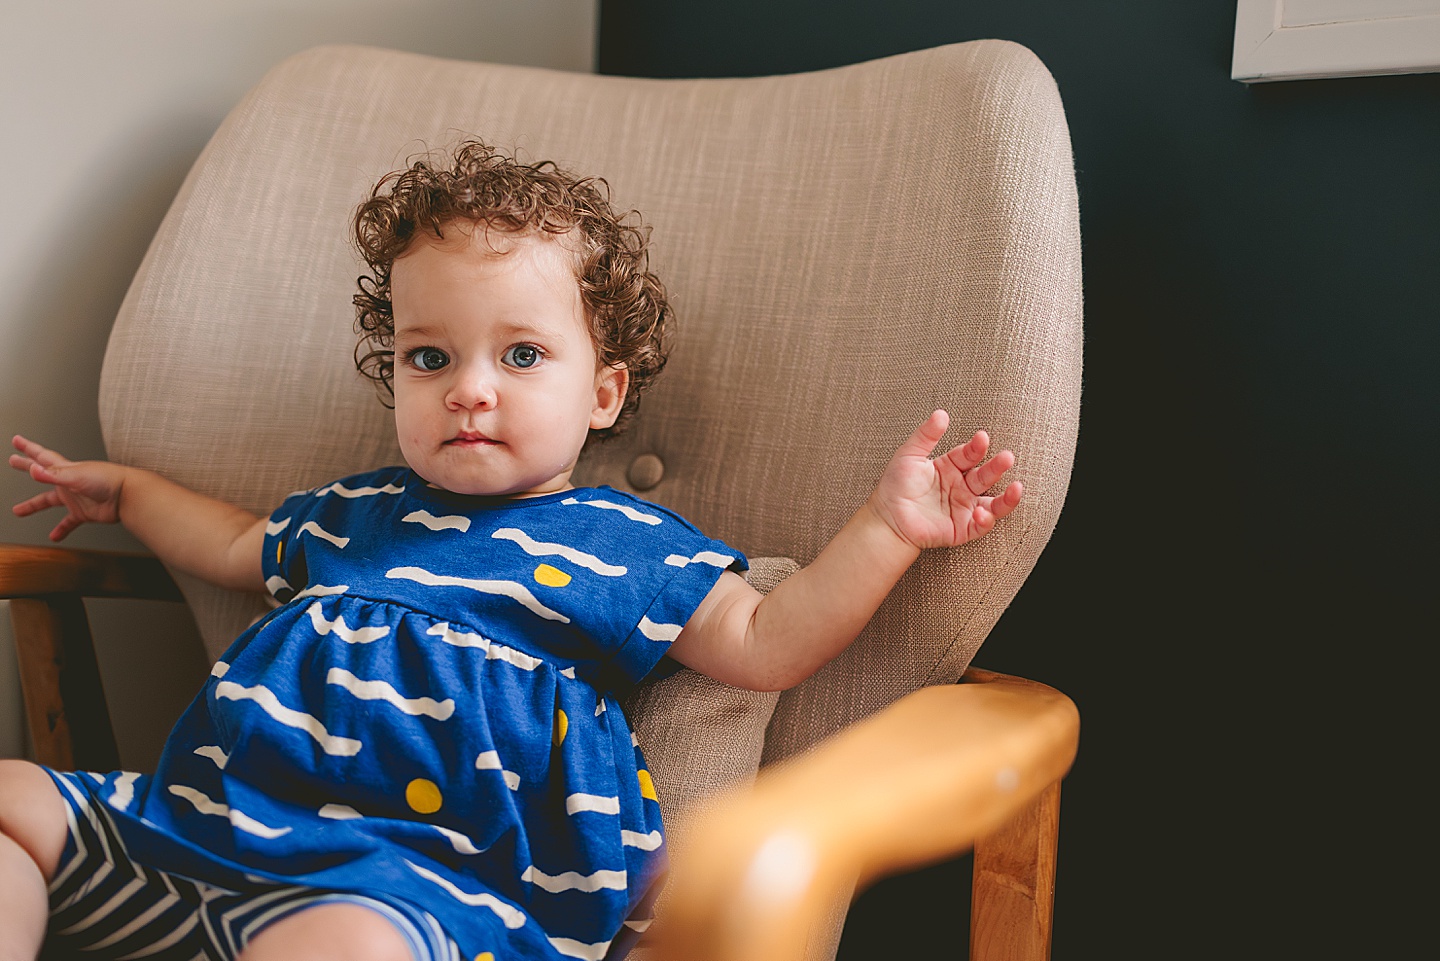 Toddler sitting in chair